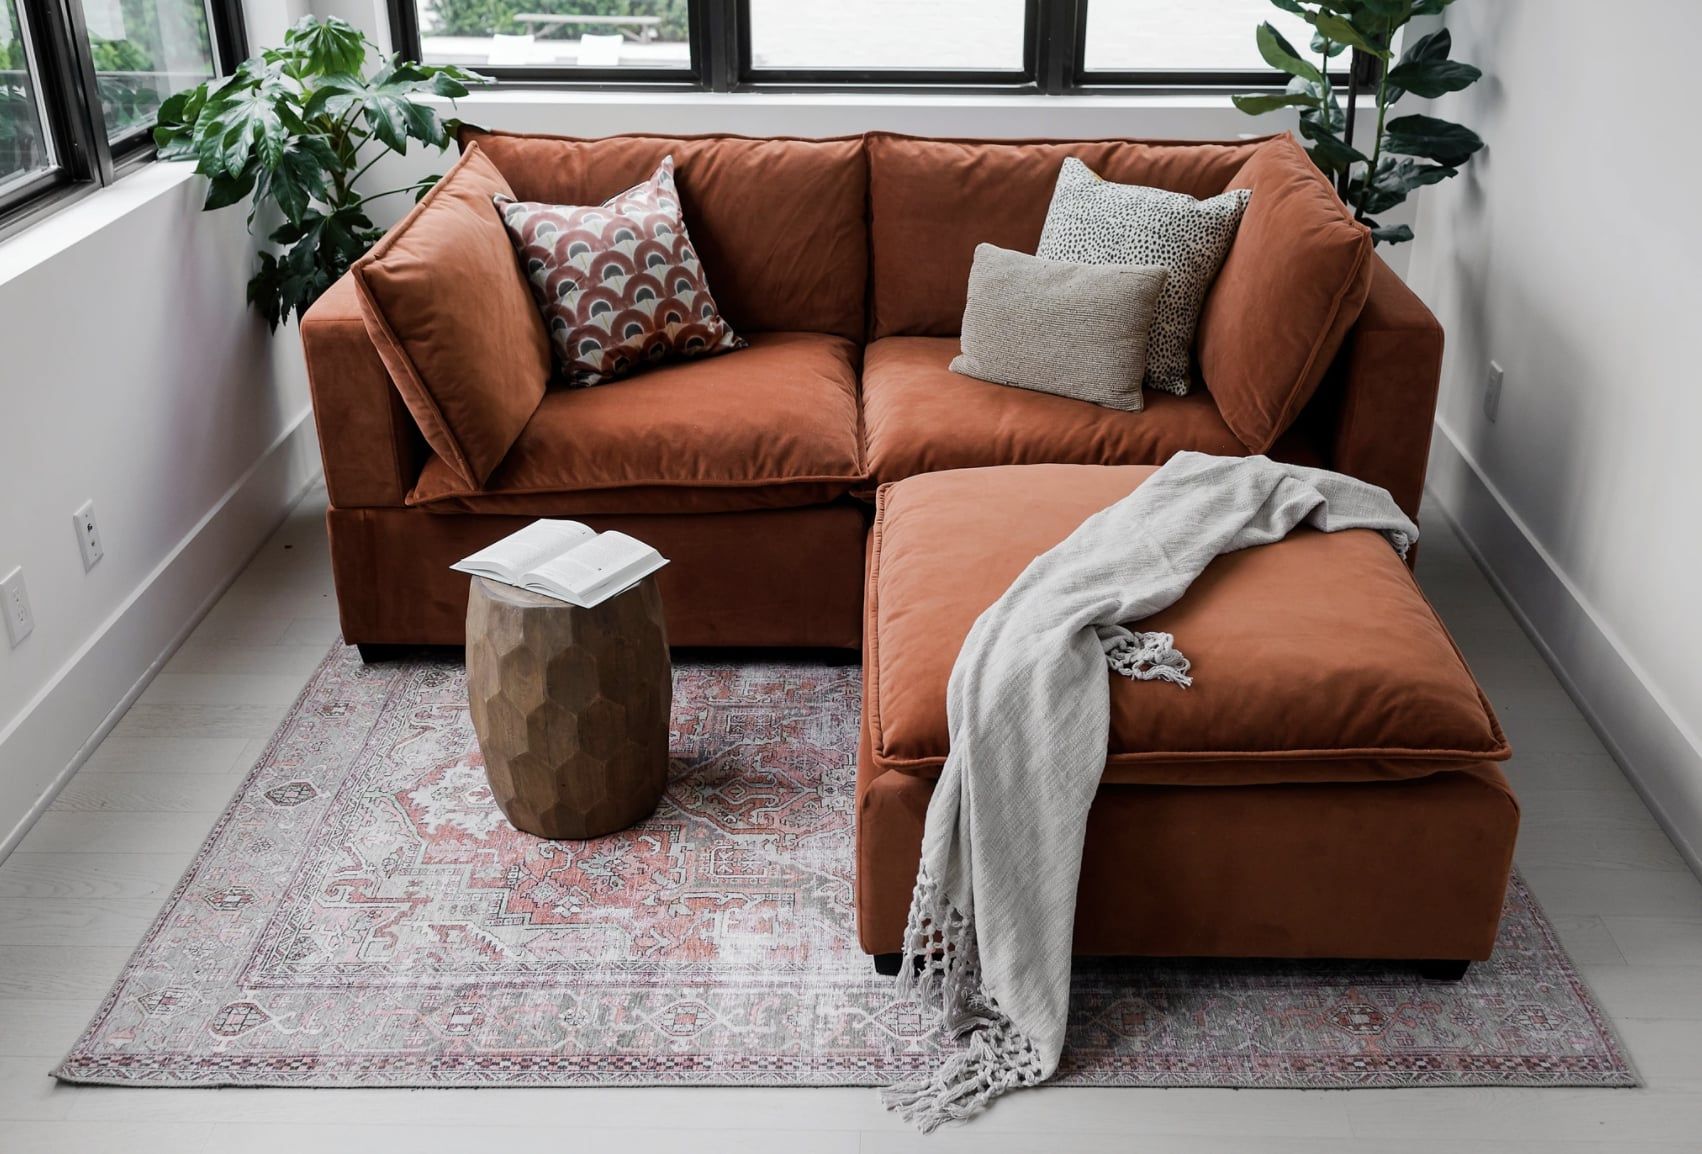 Wide range of variety of a small
sectional sofa